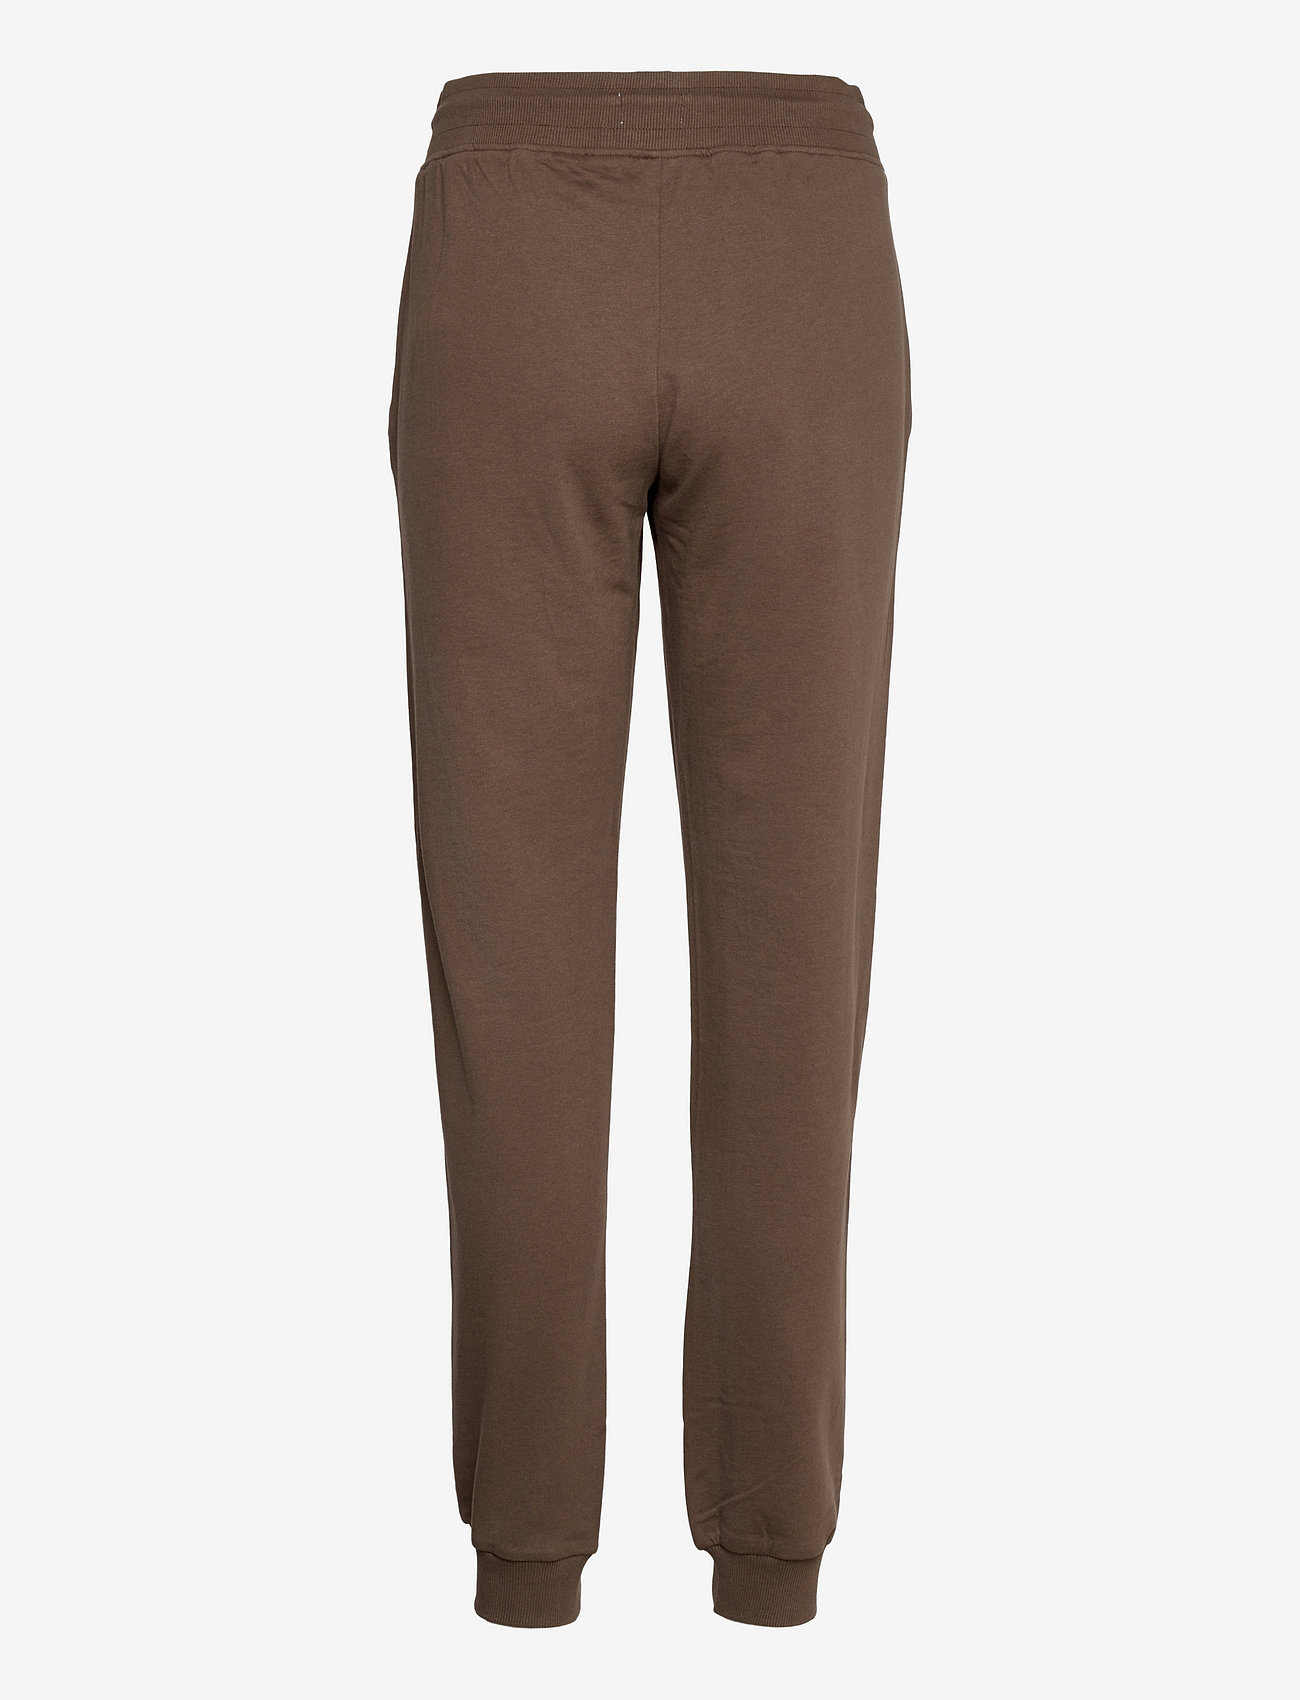 Bread & Boxers - Lounge pant - dames - earth brown - 1